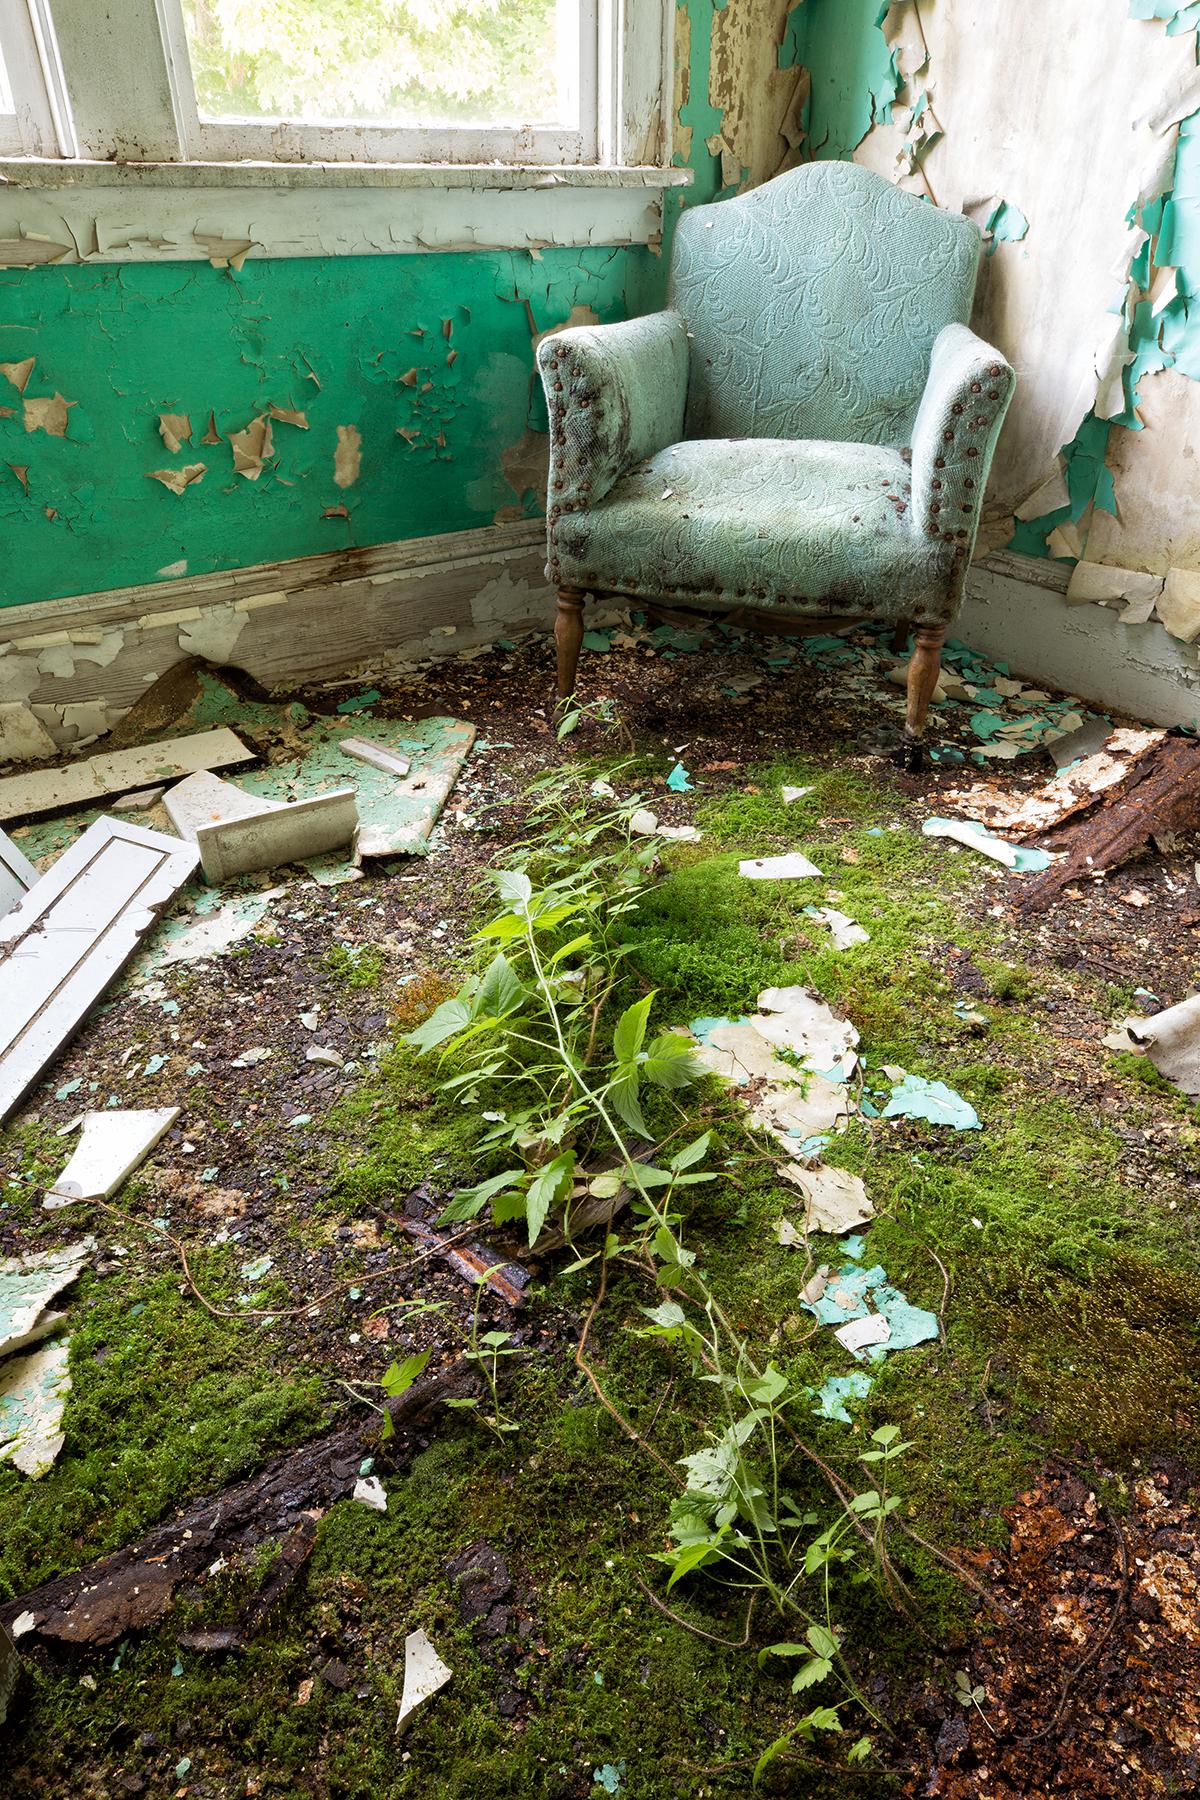 "Reach", contemporary, abandoned, chair, nature, green, blue, color photograph - Photograph by Rebecca Skinner